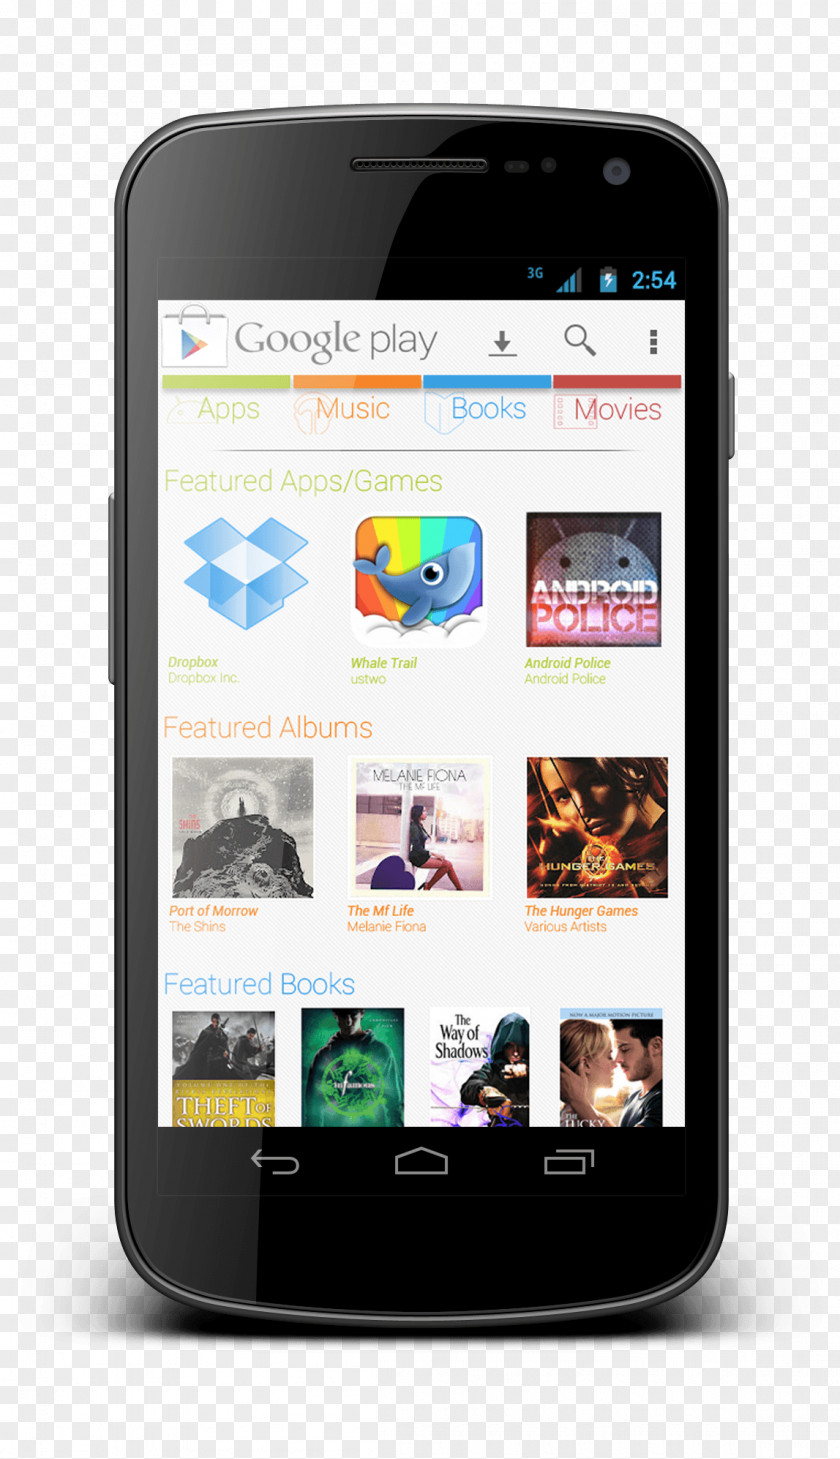 Smartphone Image Google Play Mobile App Store Optimization Android PNG